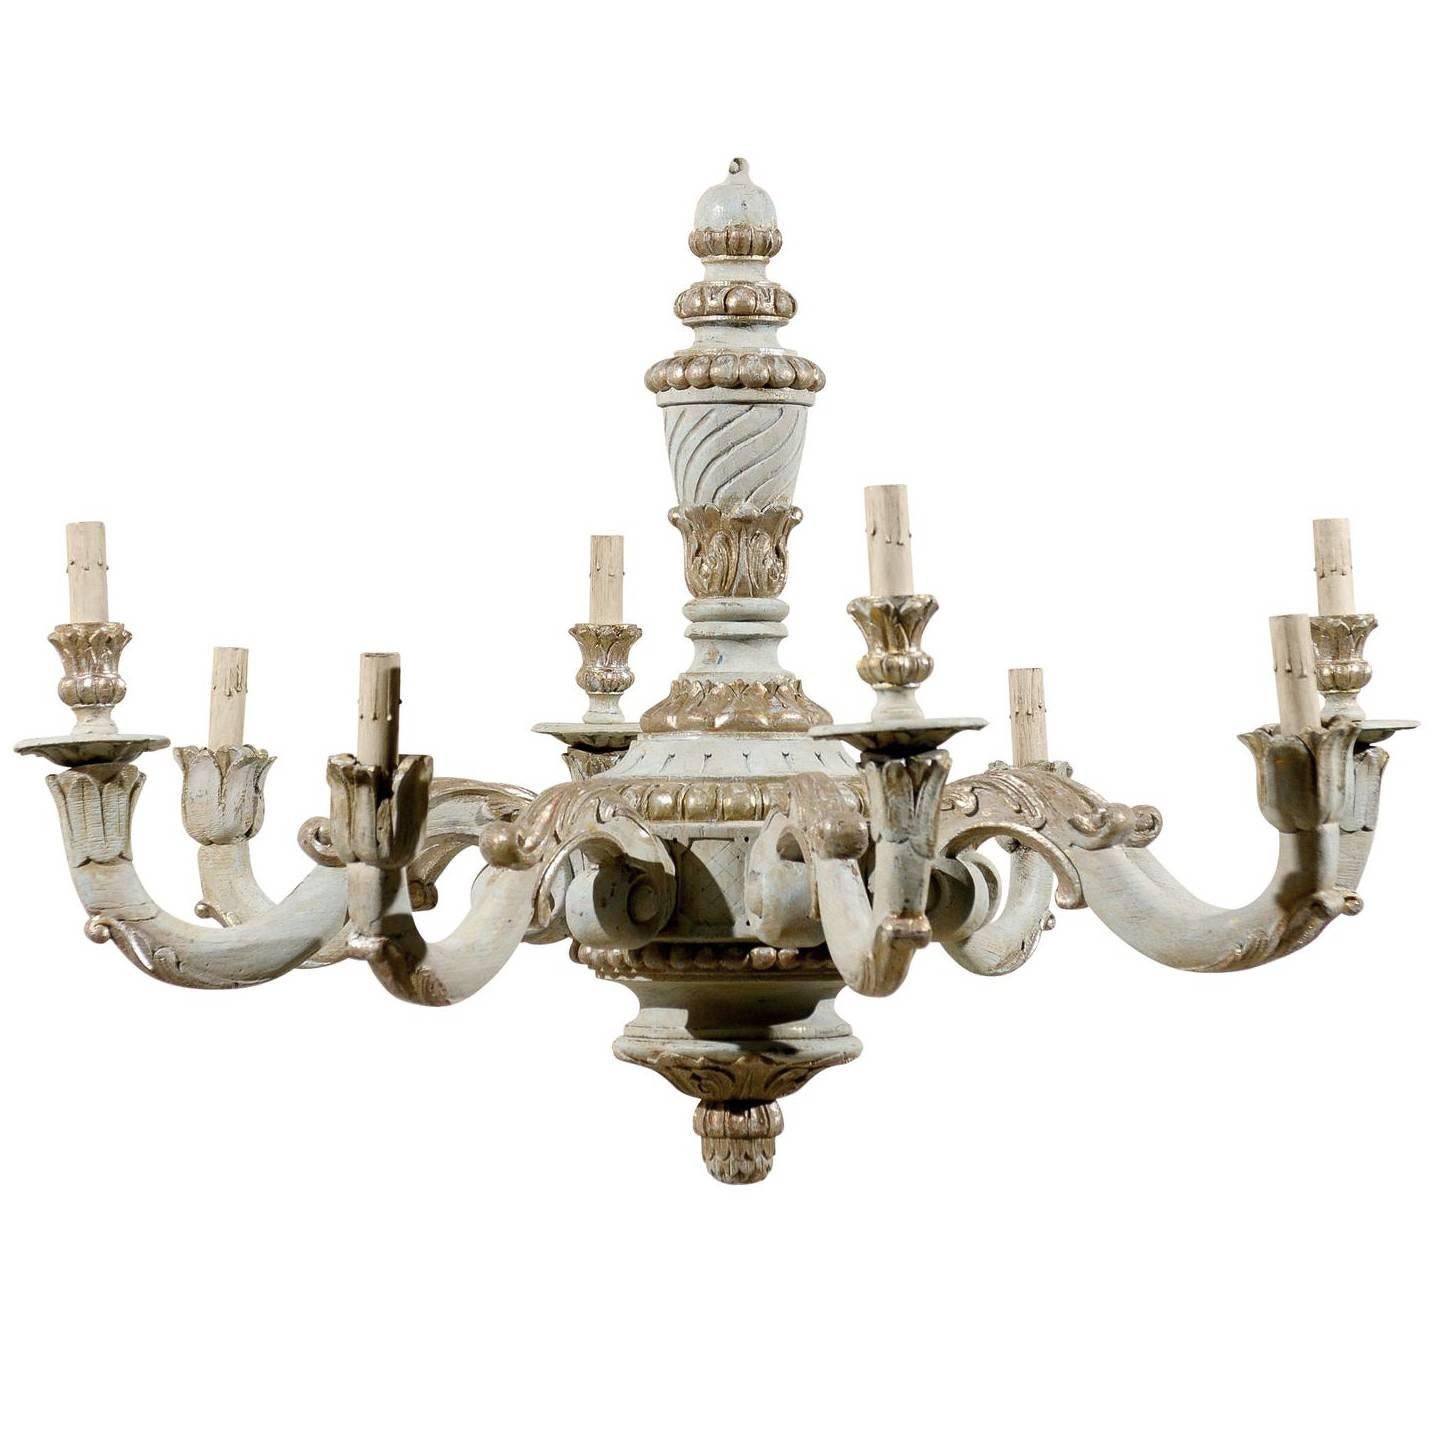 French Vintage Eight-Light Wooden Chandelier with Scrolled Arms